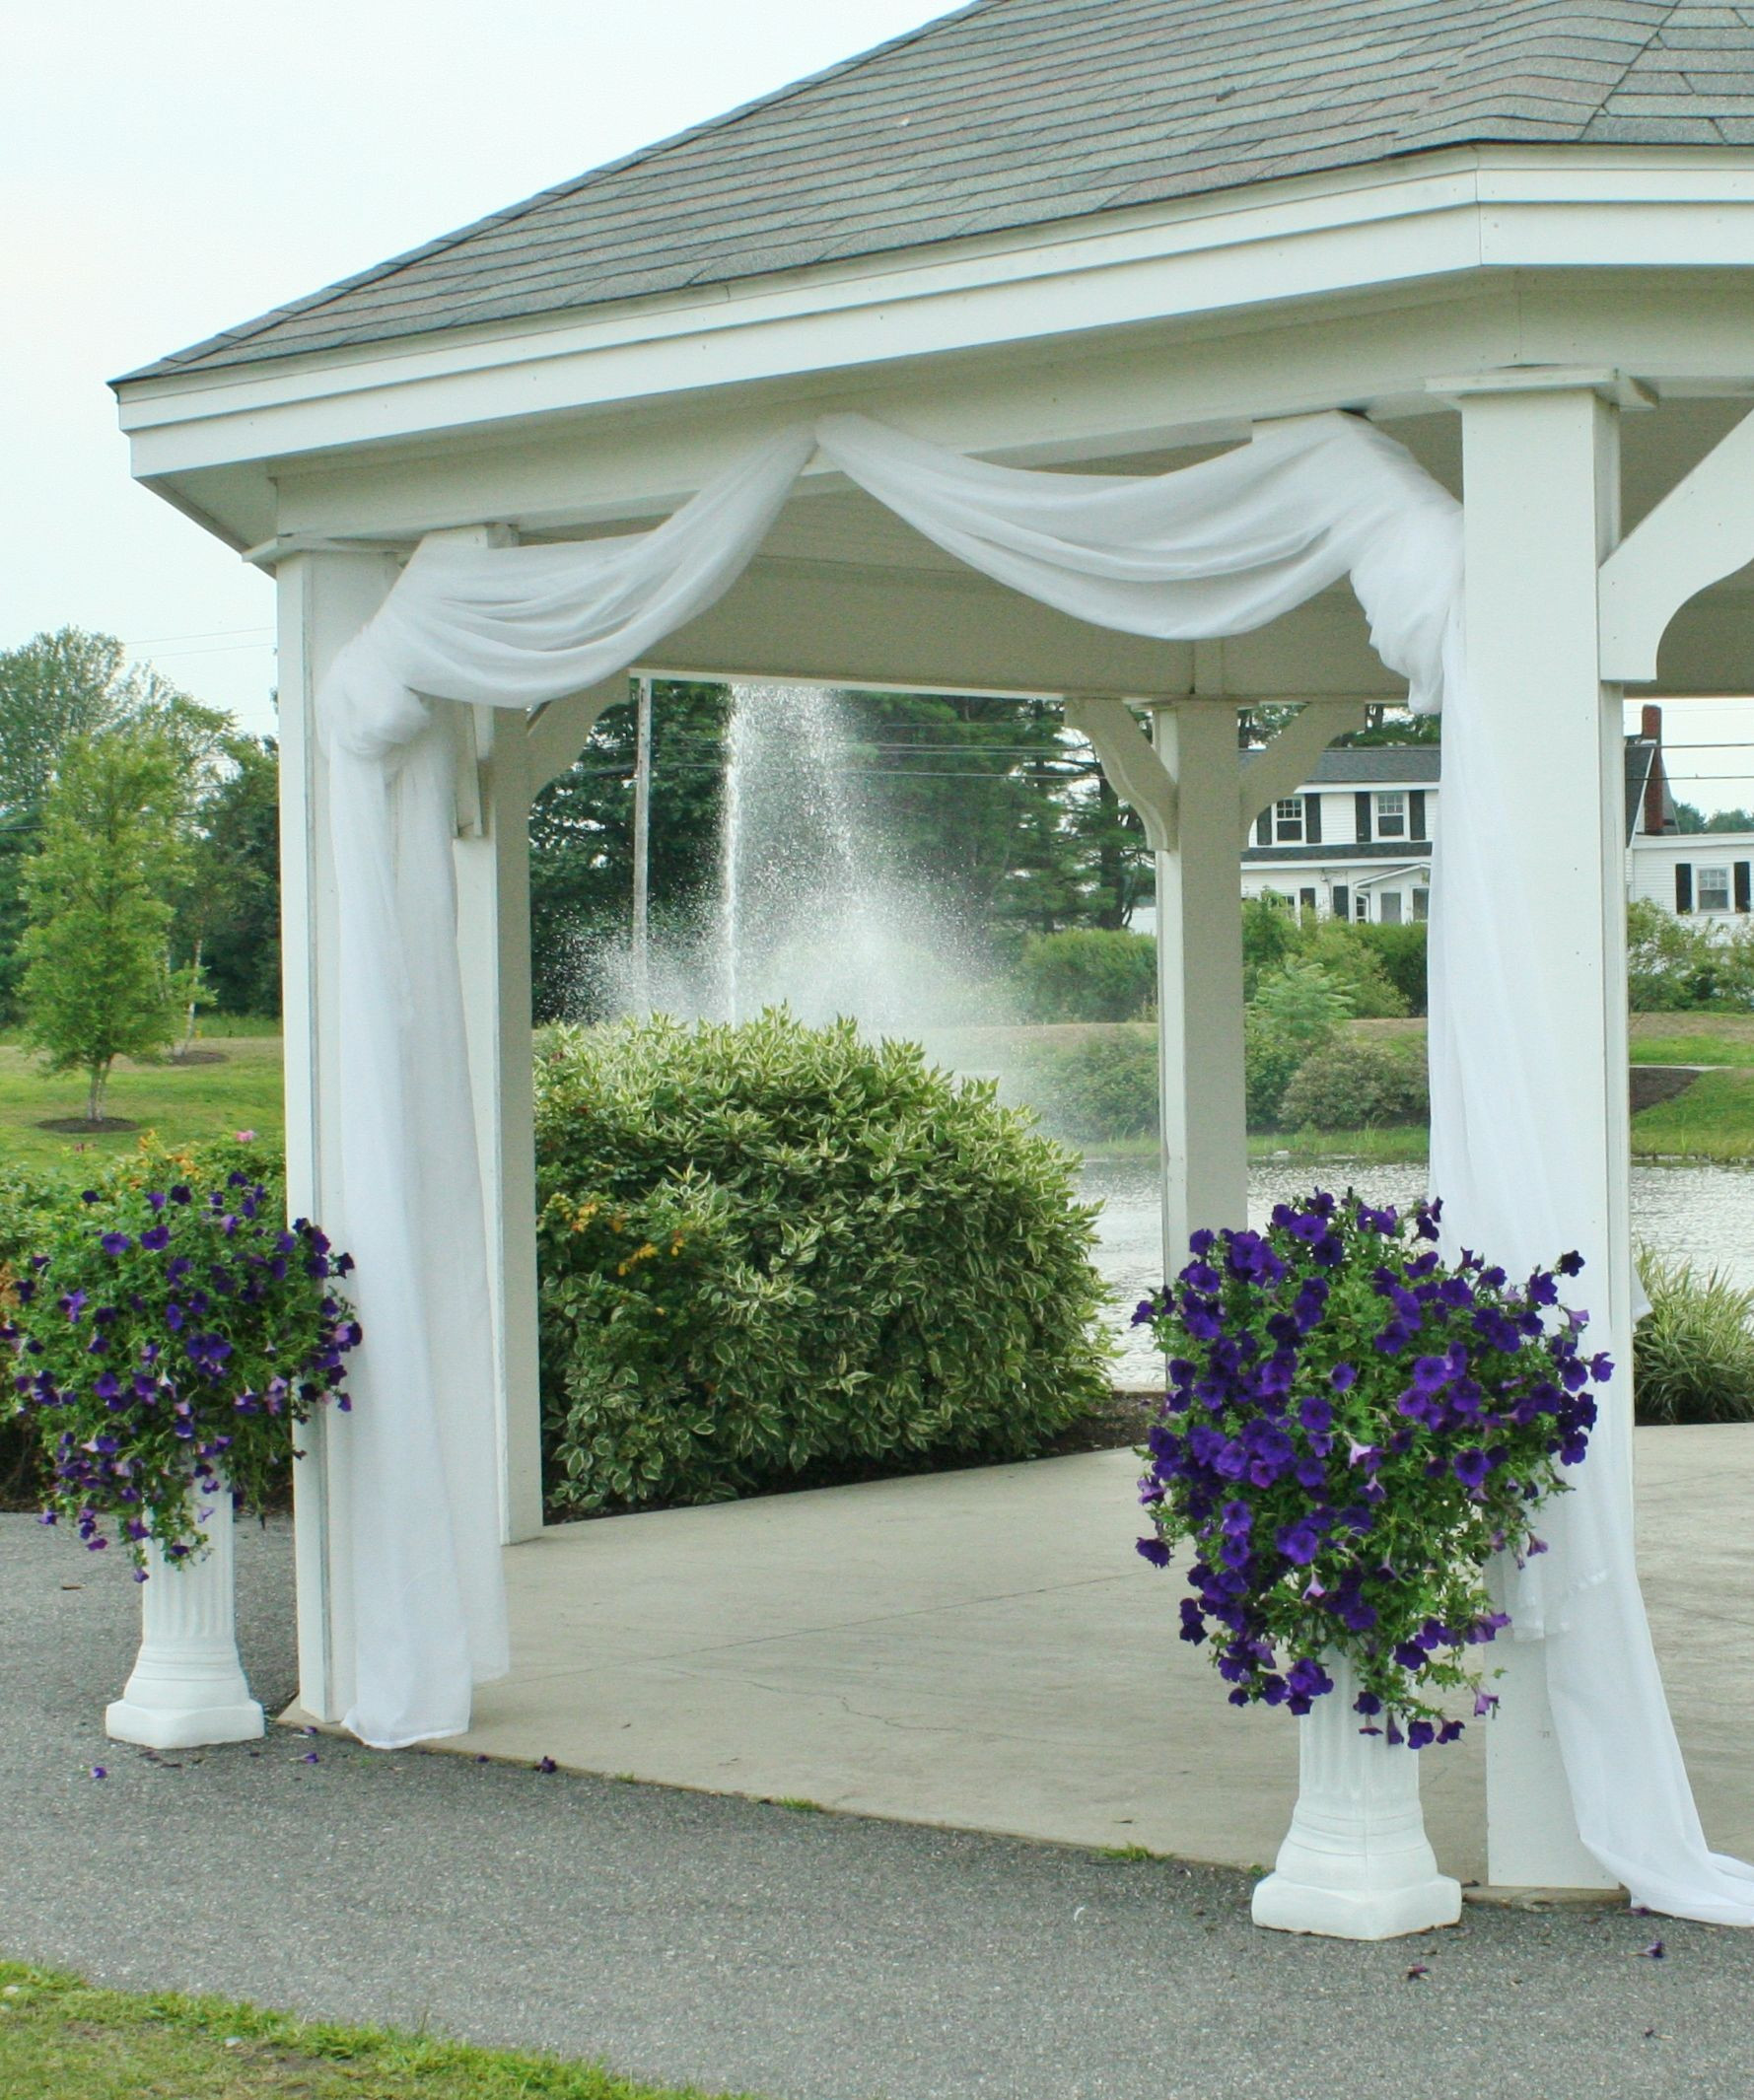 How To Decorate A Gazebo For A Wedding
 Pin on Wedding inspiration for August 2014